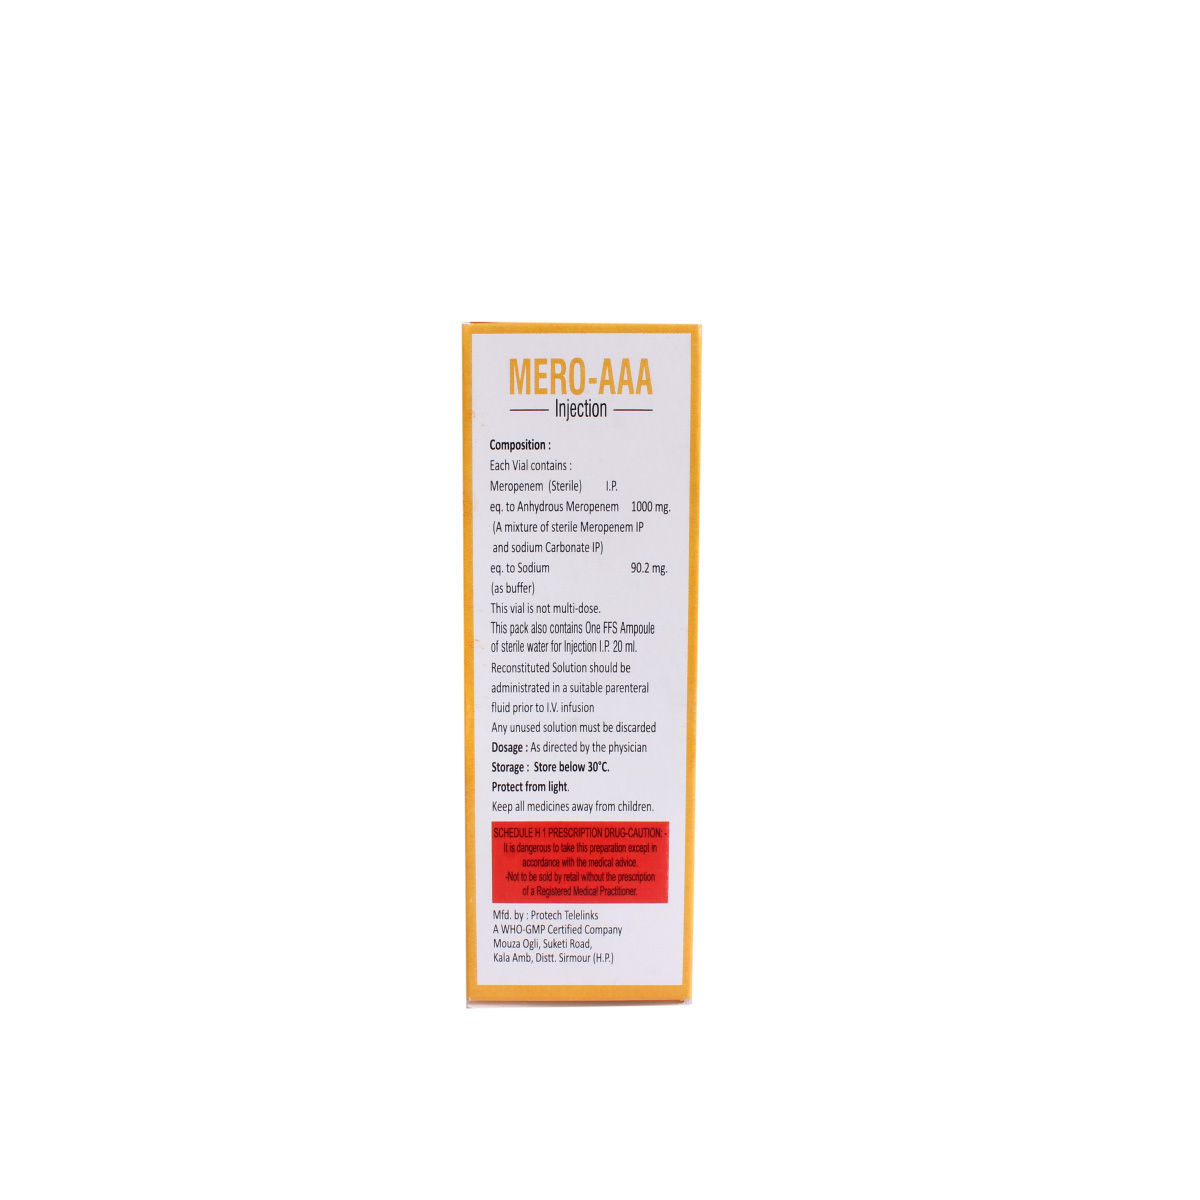 Mero-Aaa 1Gm Injection, Pack of 1 INJECTION